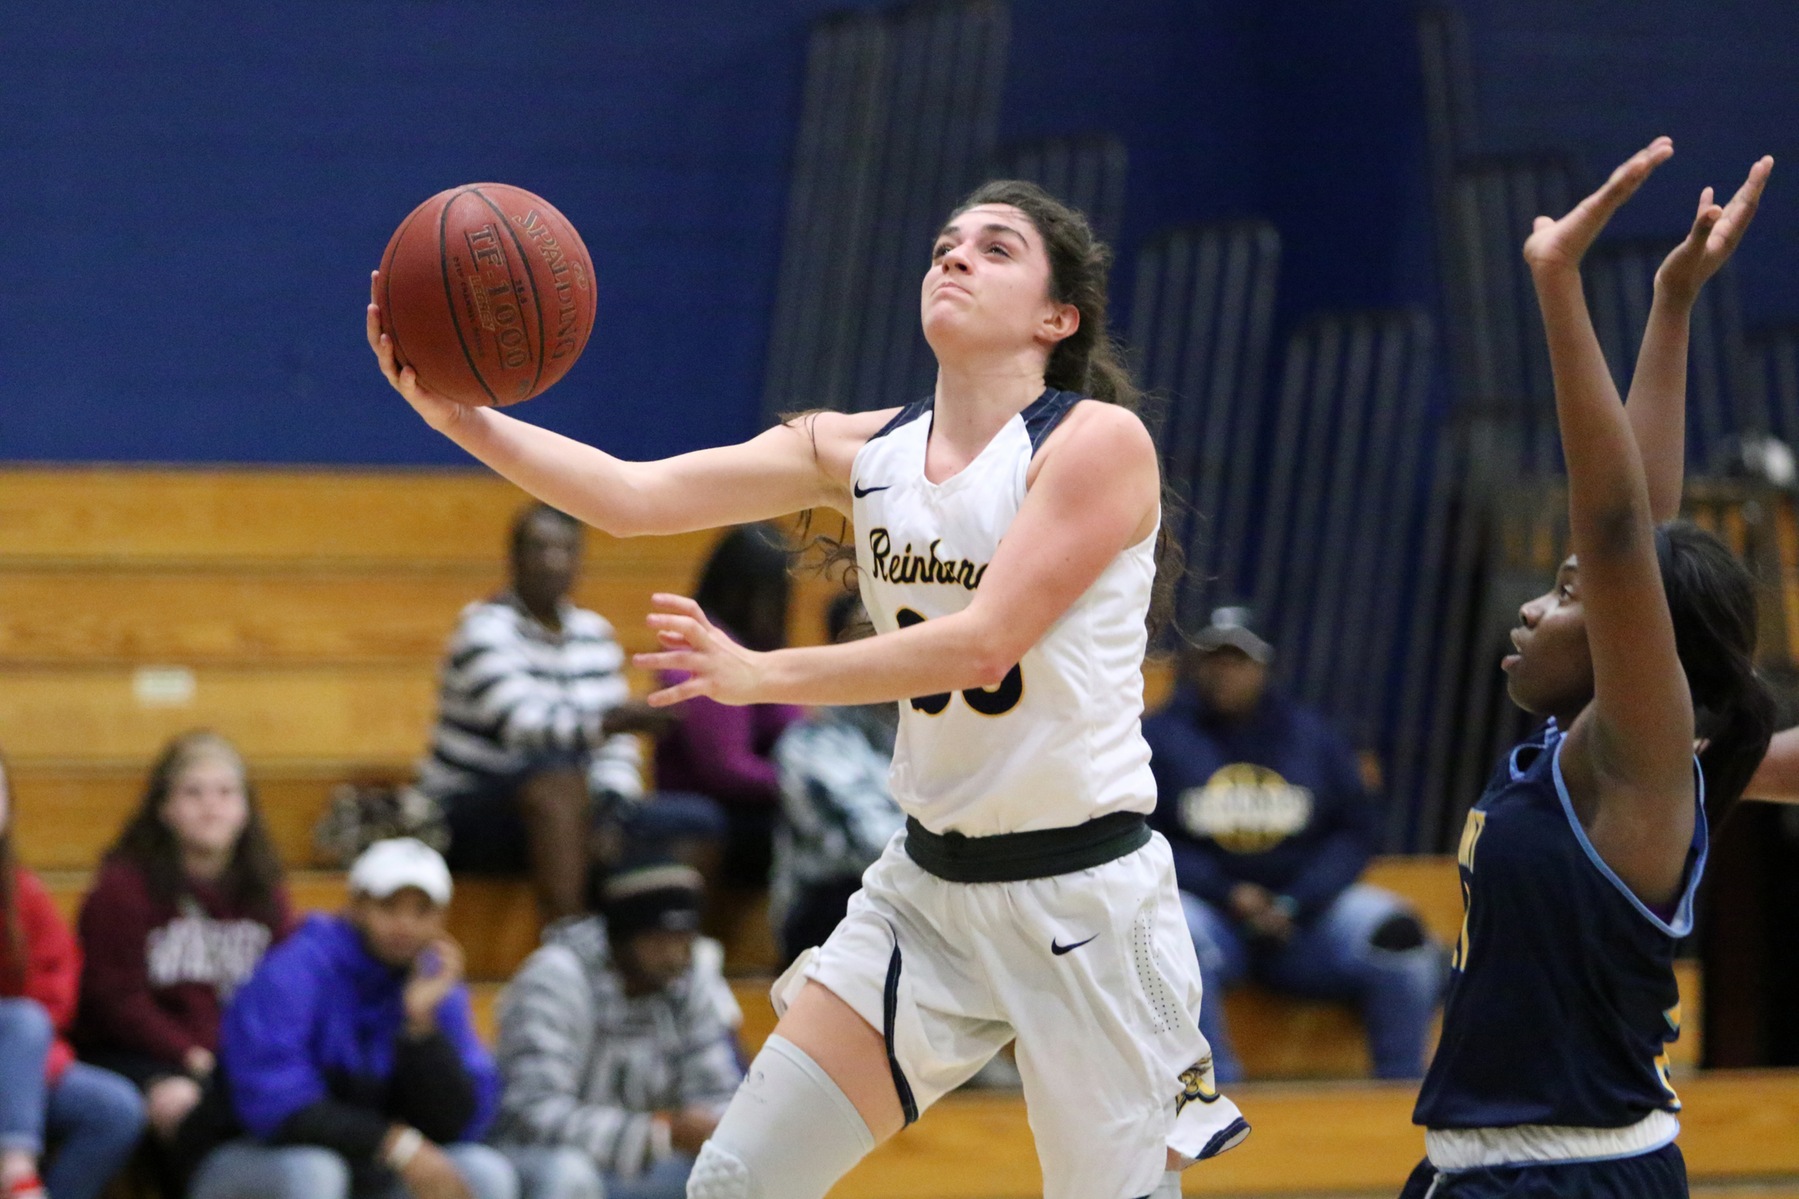 NAIA Division II Women's Basketball National Player of the Week - No. 2